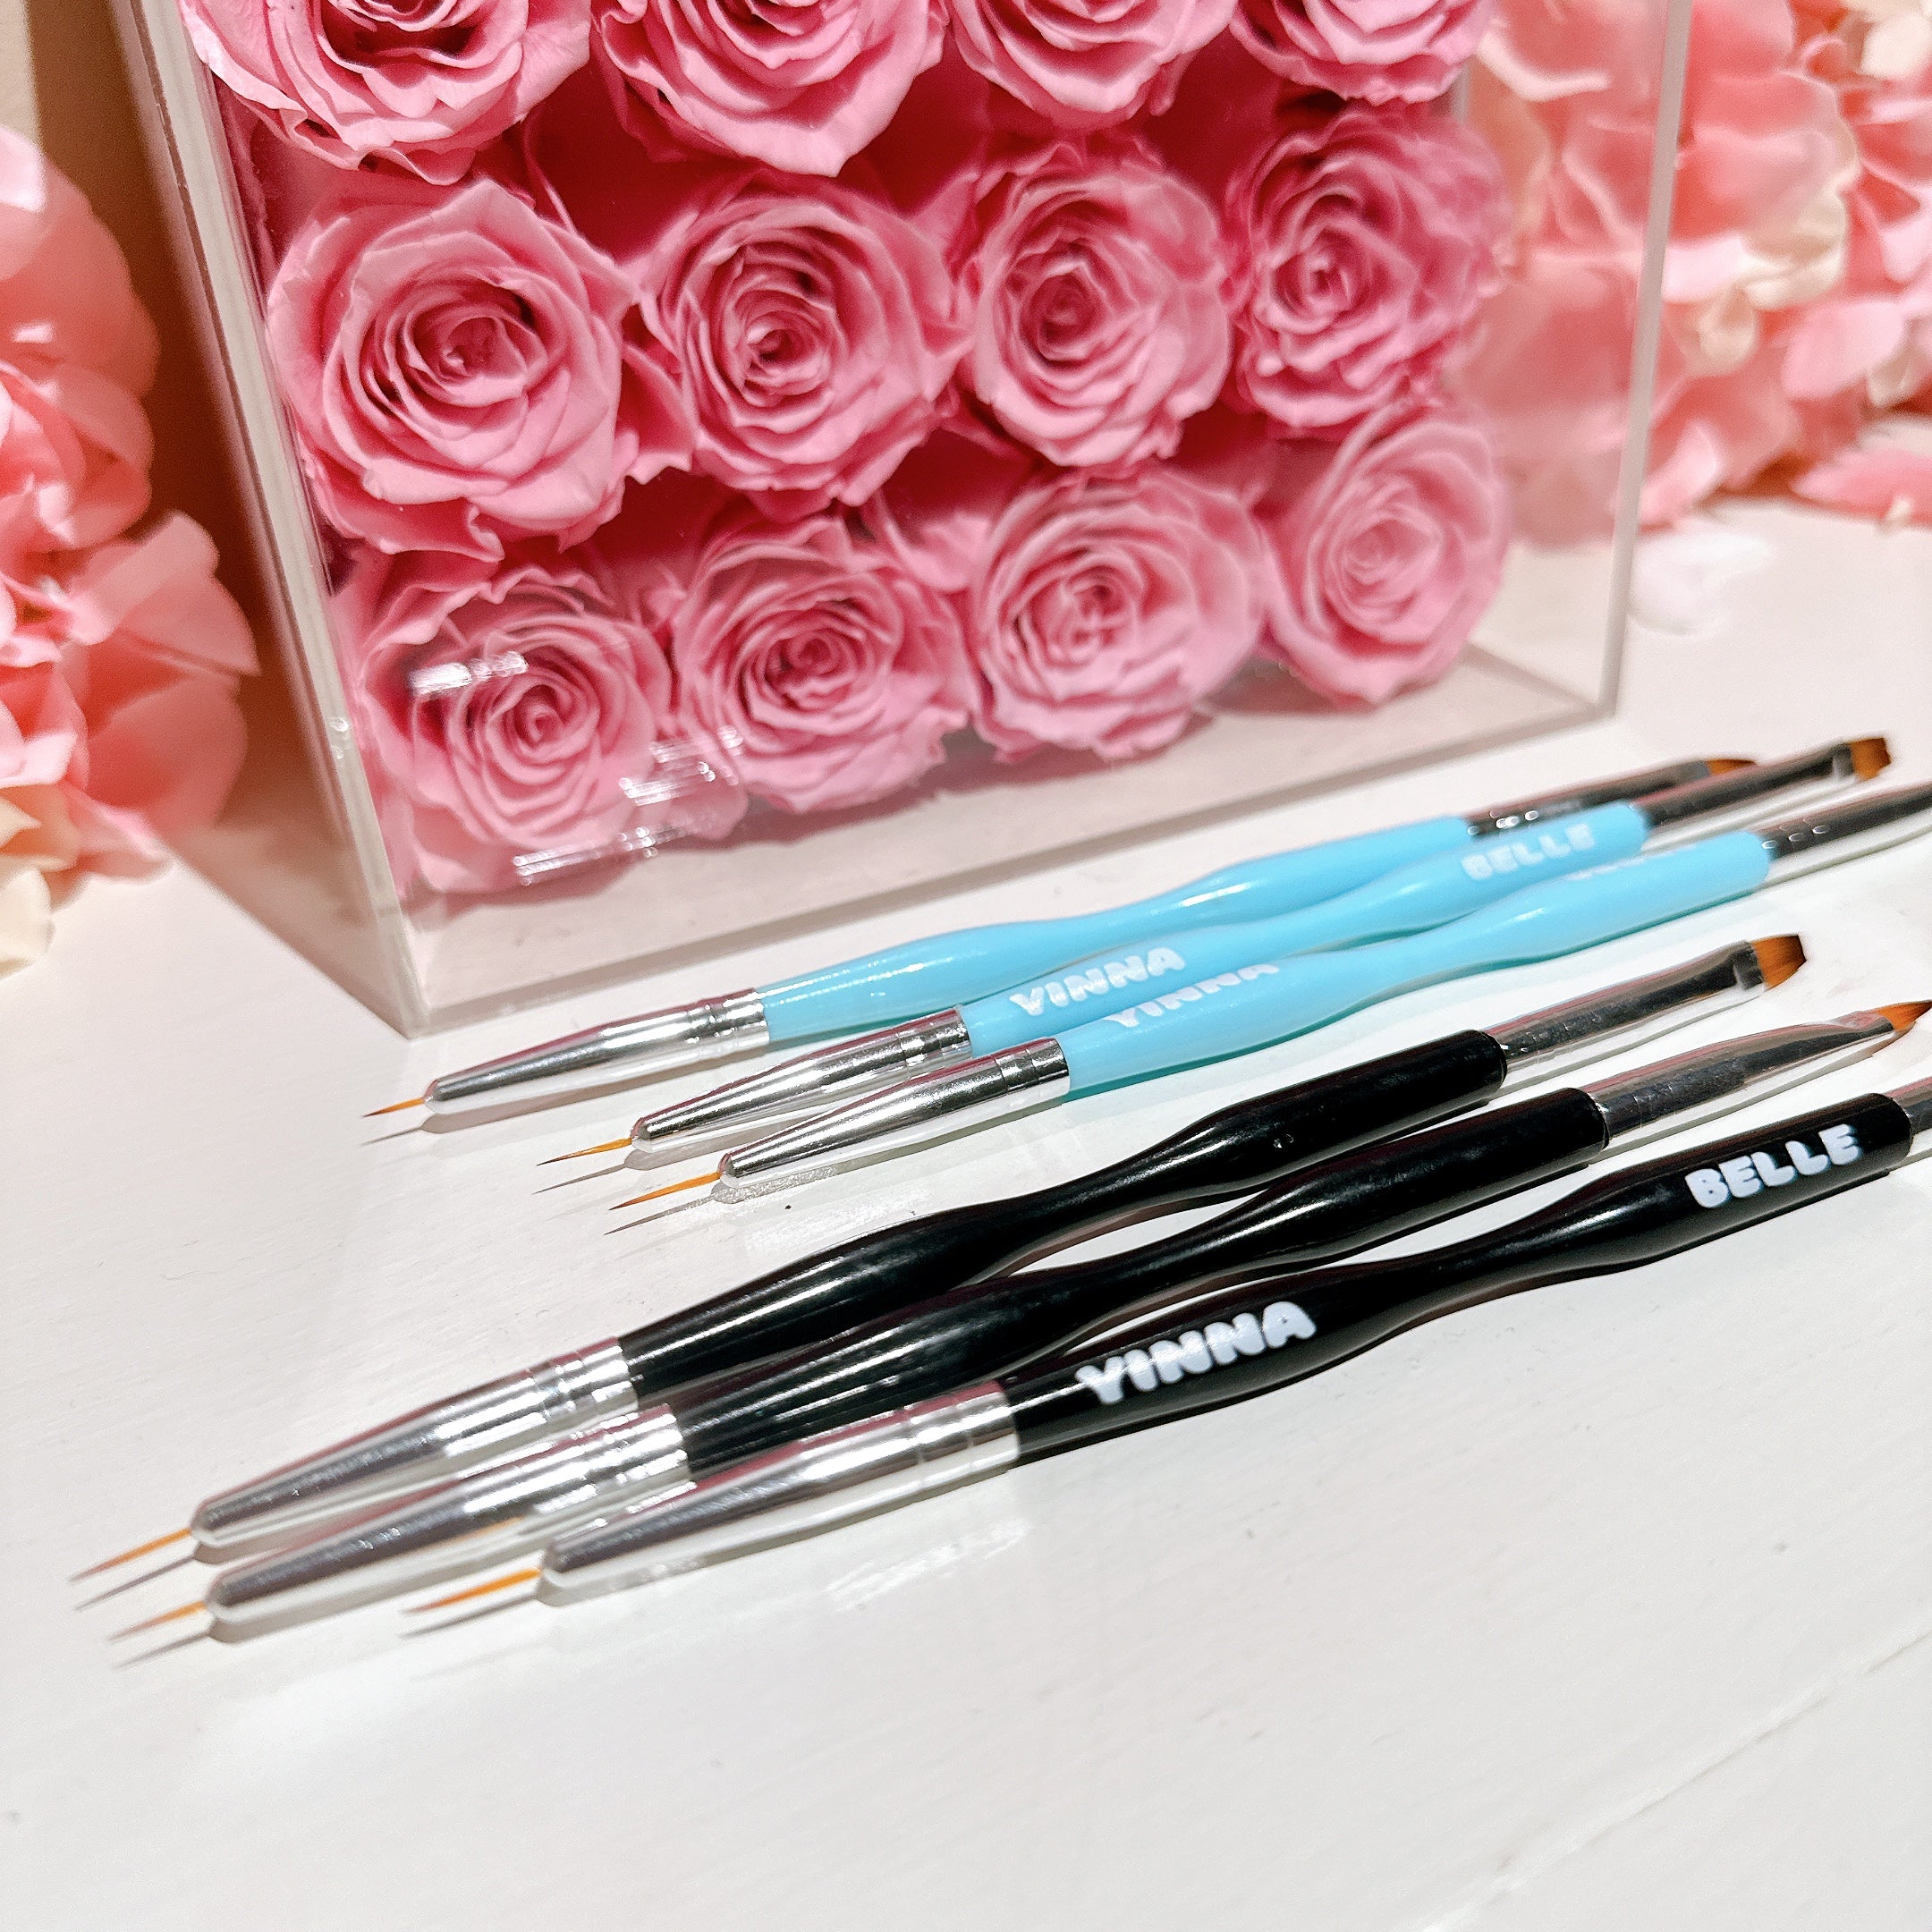 Double ended water activated eyeliner brush set, nail art brushes